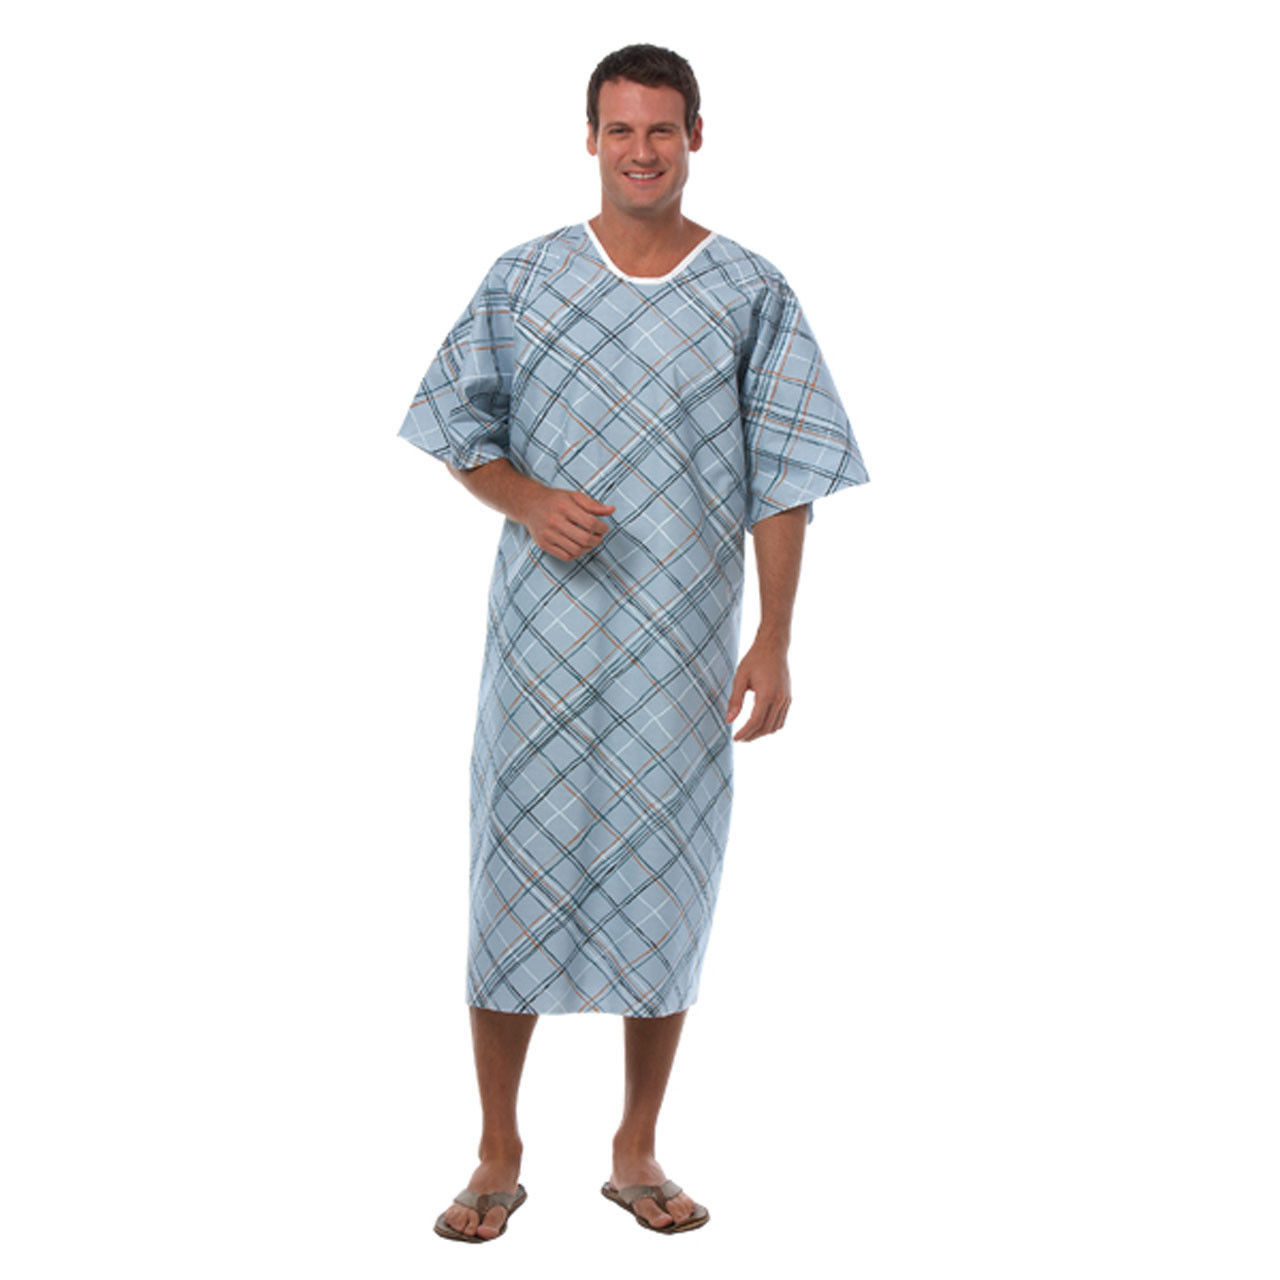 Hospital Patient Gown Manufacturers, Suppliers and Exporters from India,  China